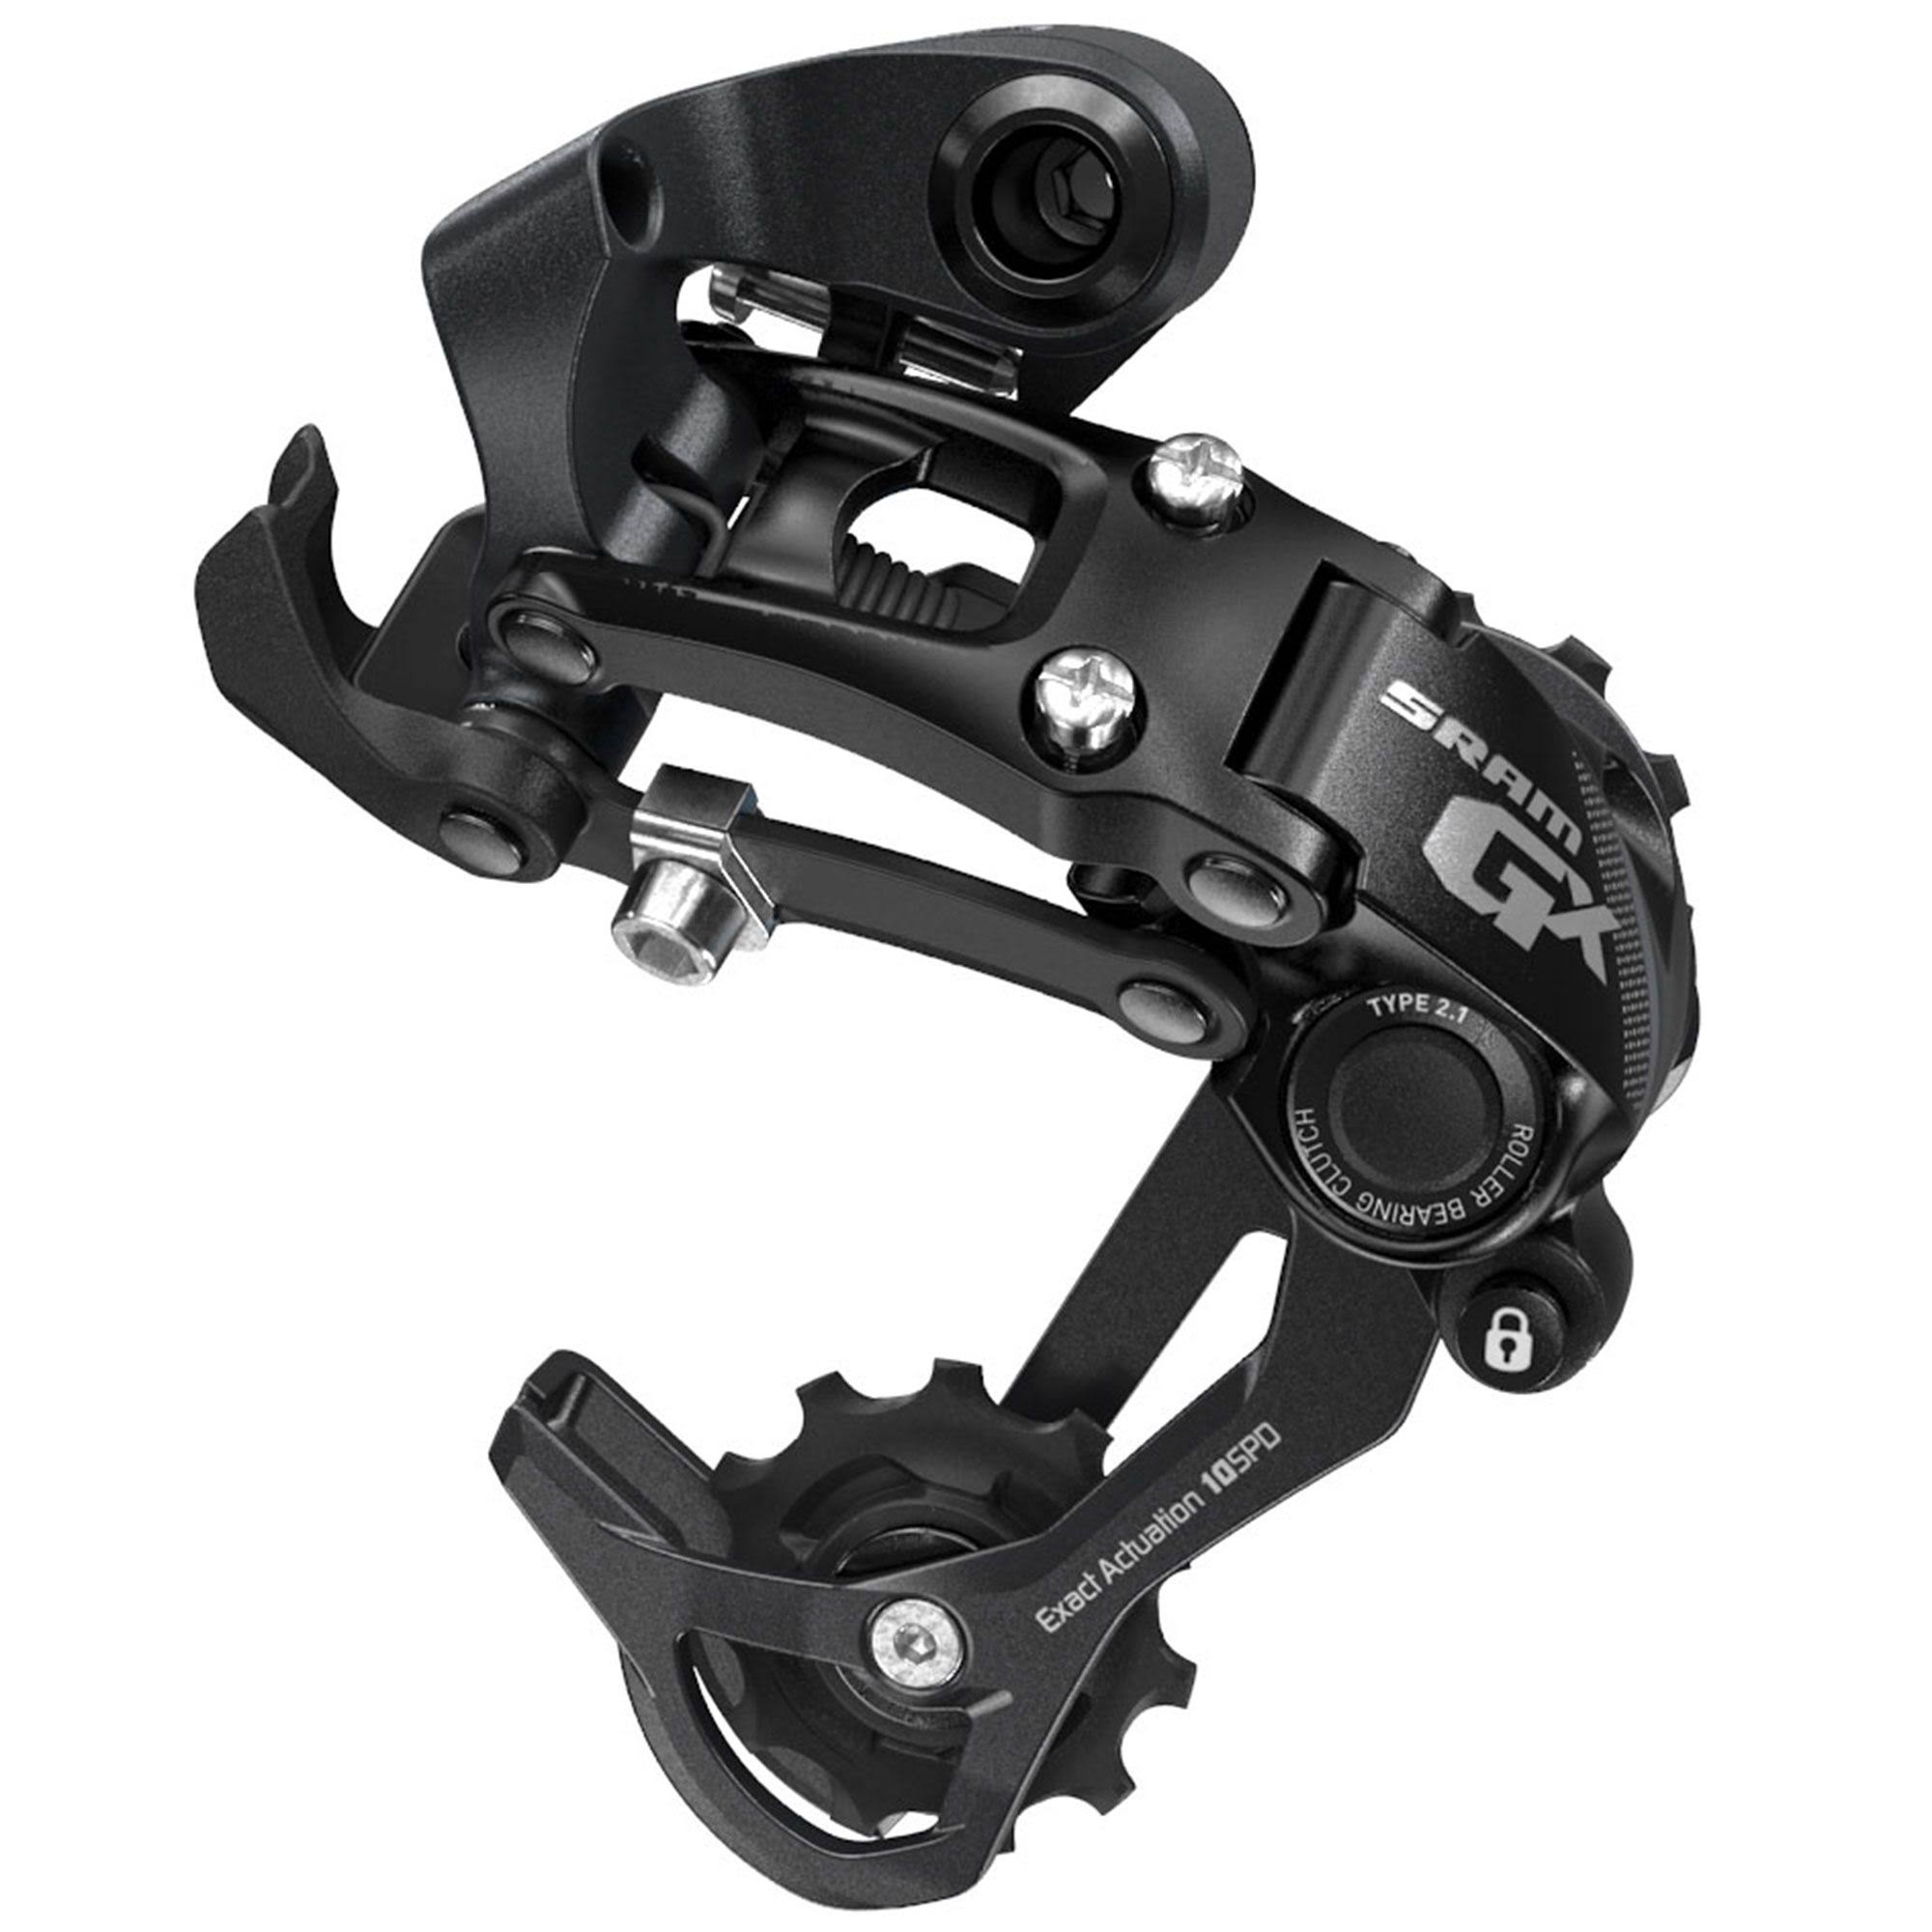 SRAM GX Type 2.1 Bicycle Rear Derailleur with 10-Speed Long Cage - Black